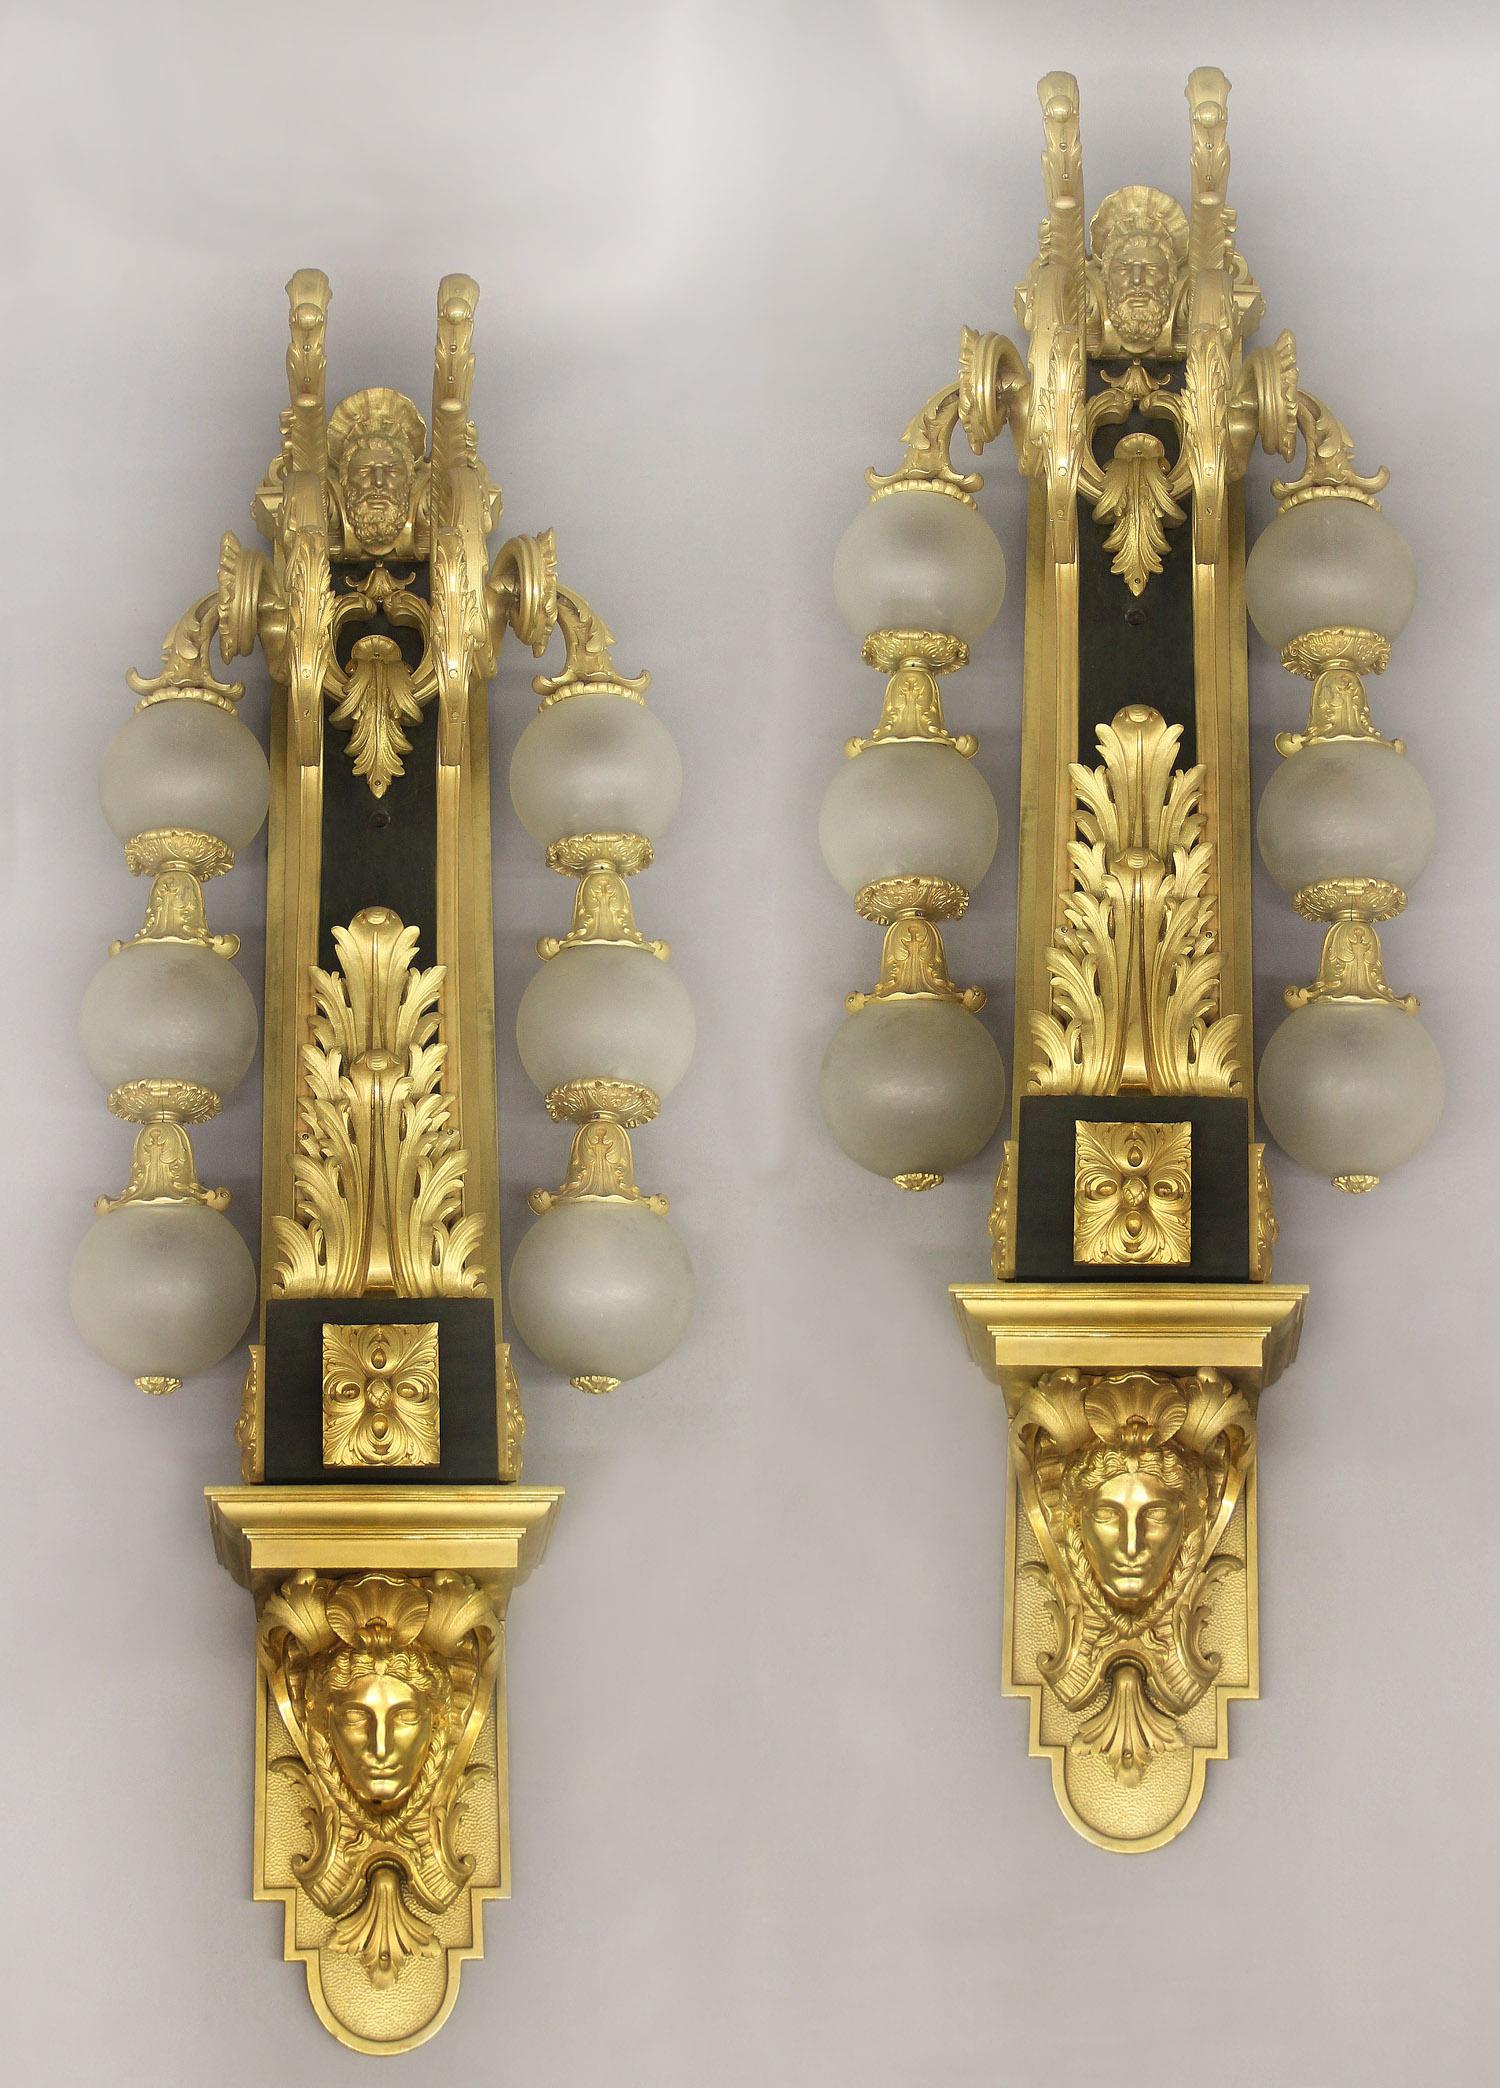 An Impressive and Imposing Pair of Early 20th Century Gilt Bronze Six Light Sconces

The long body topped and centered with a mask of Hercules, above C scrolled acanthus branches, two arms with three round frosted lit globes run down the sides,